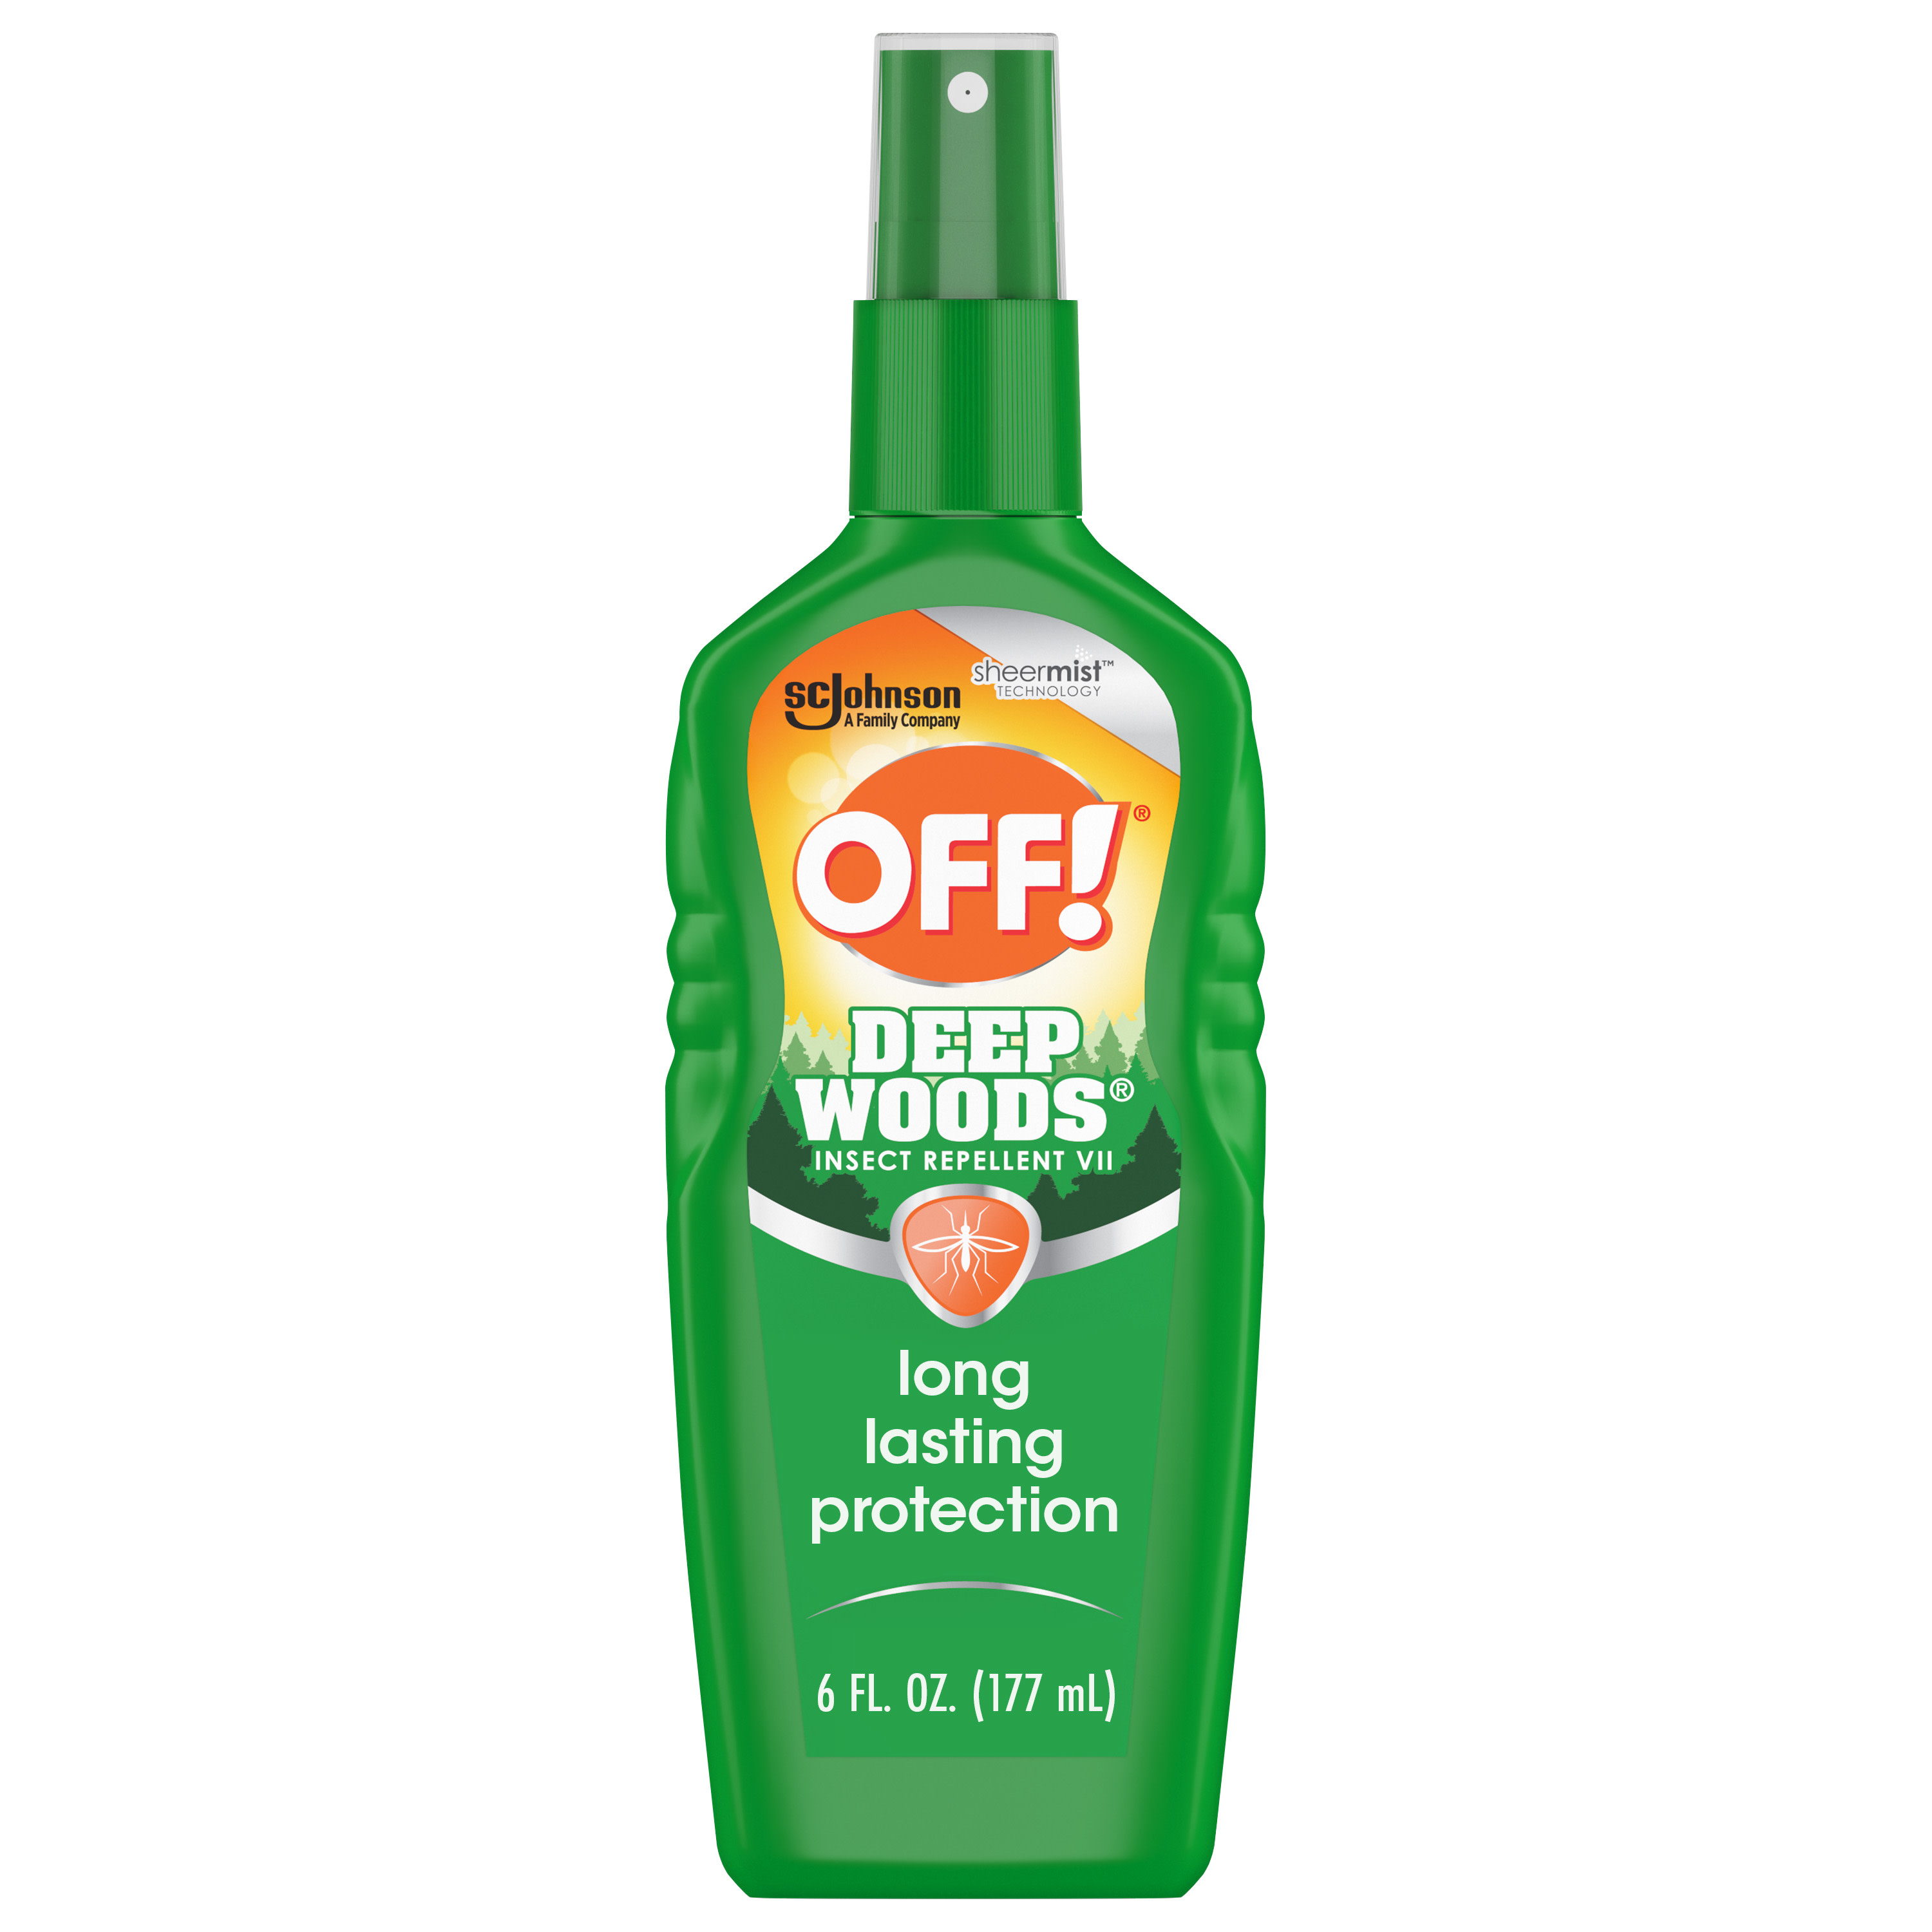 OFF! Deep Woods Insect Repellent VII, Mosquito Bug Spray, 6 fl oz - image 1 of 11